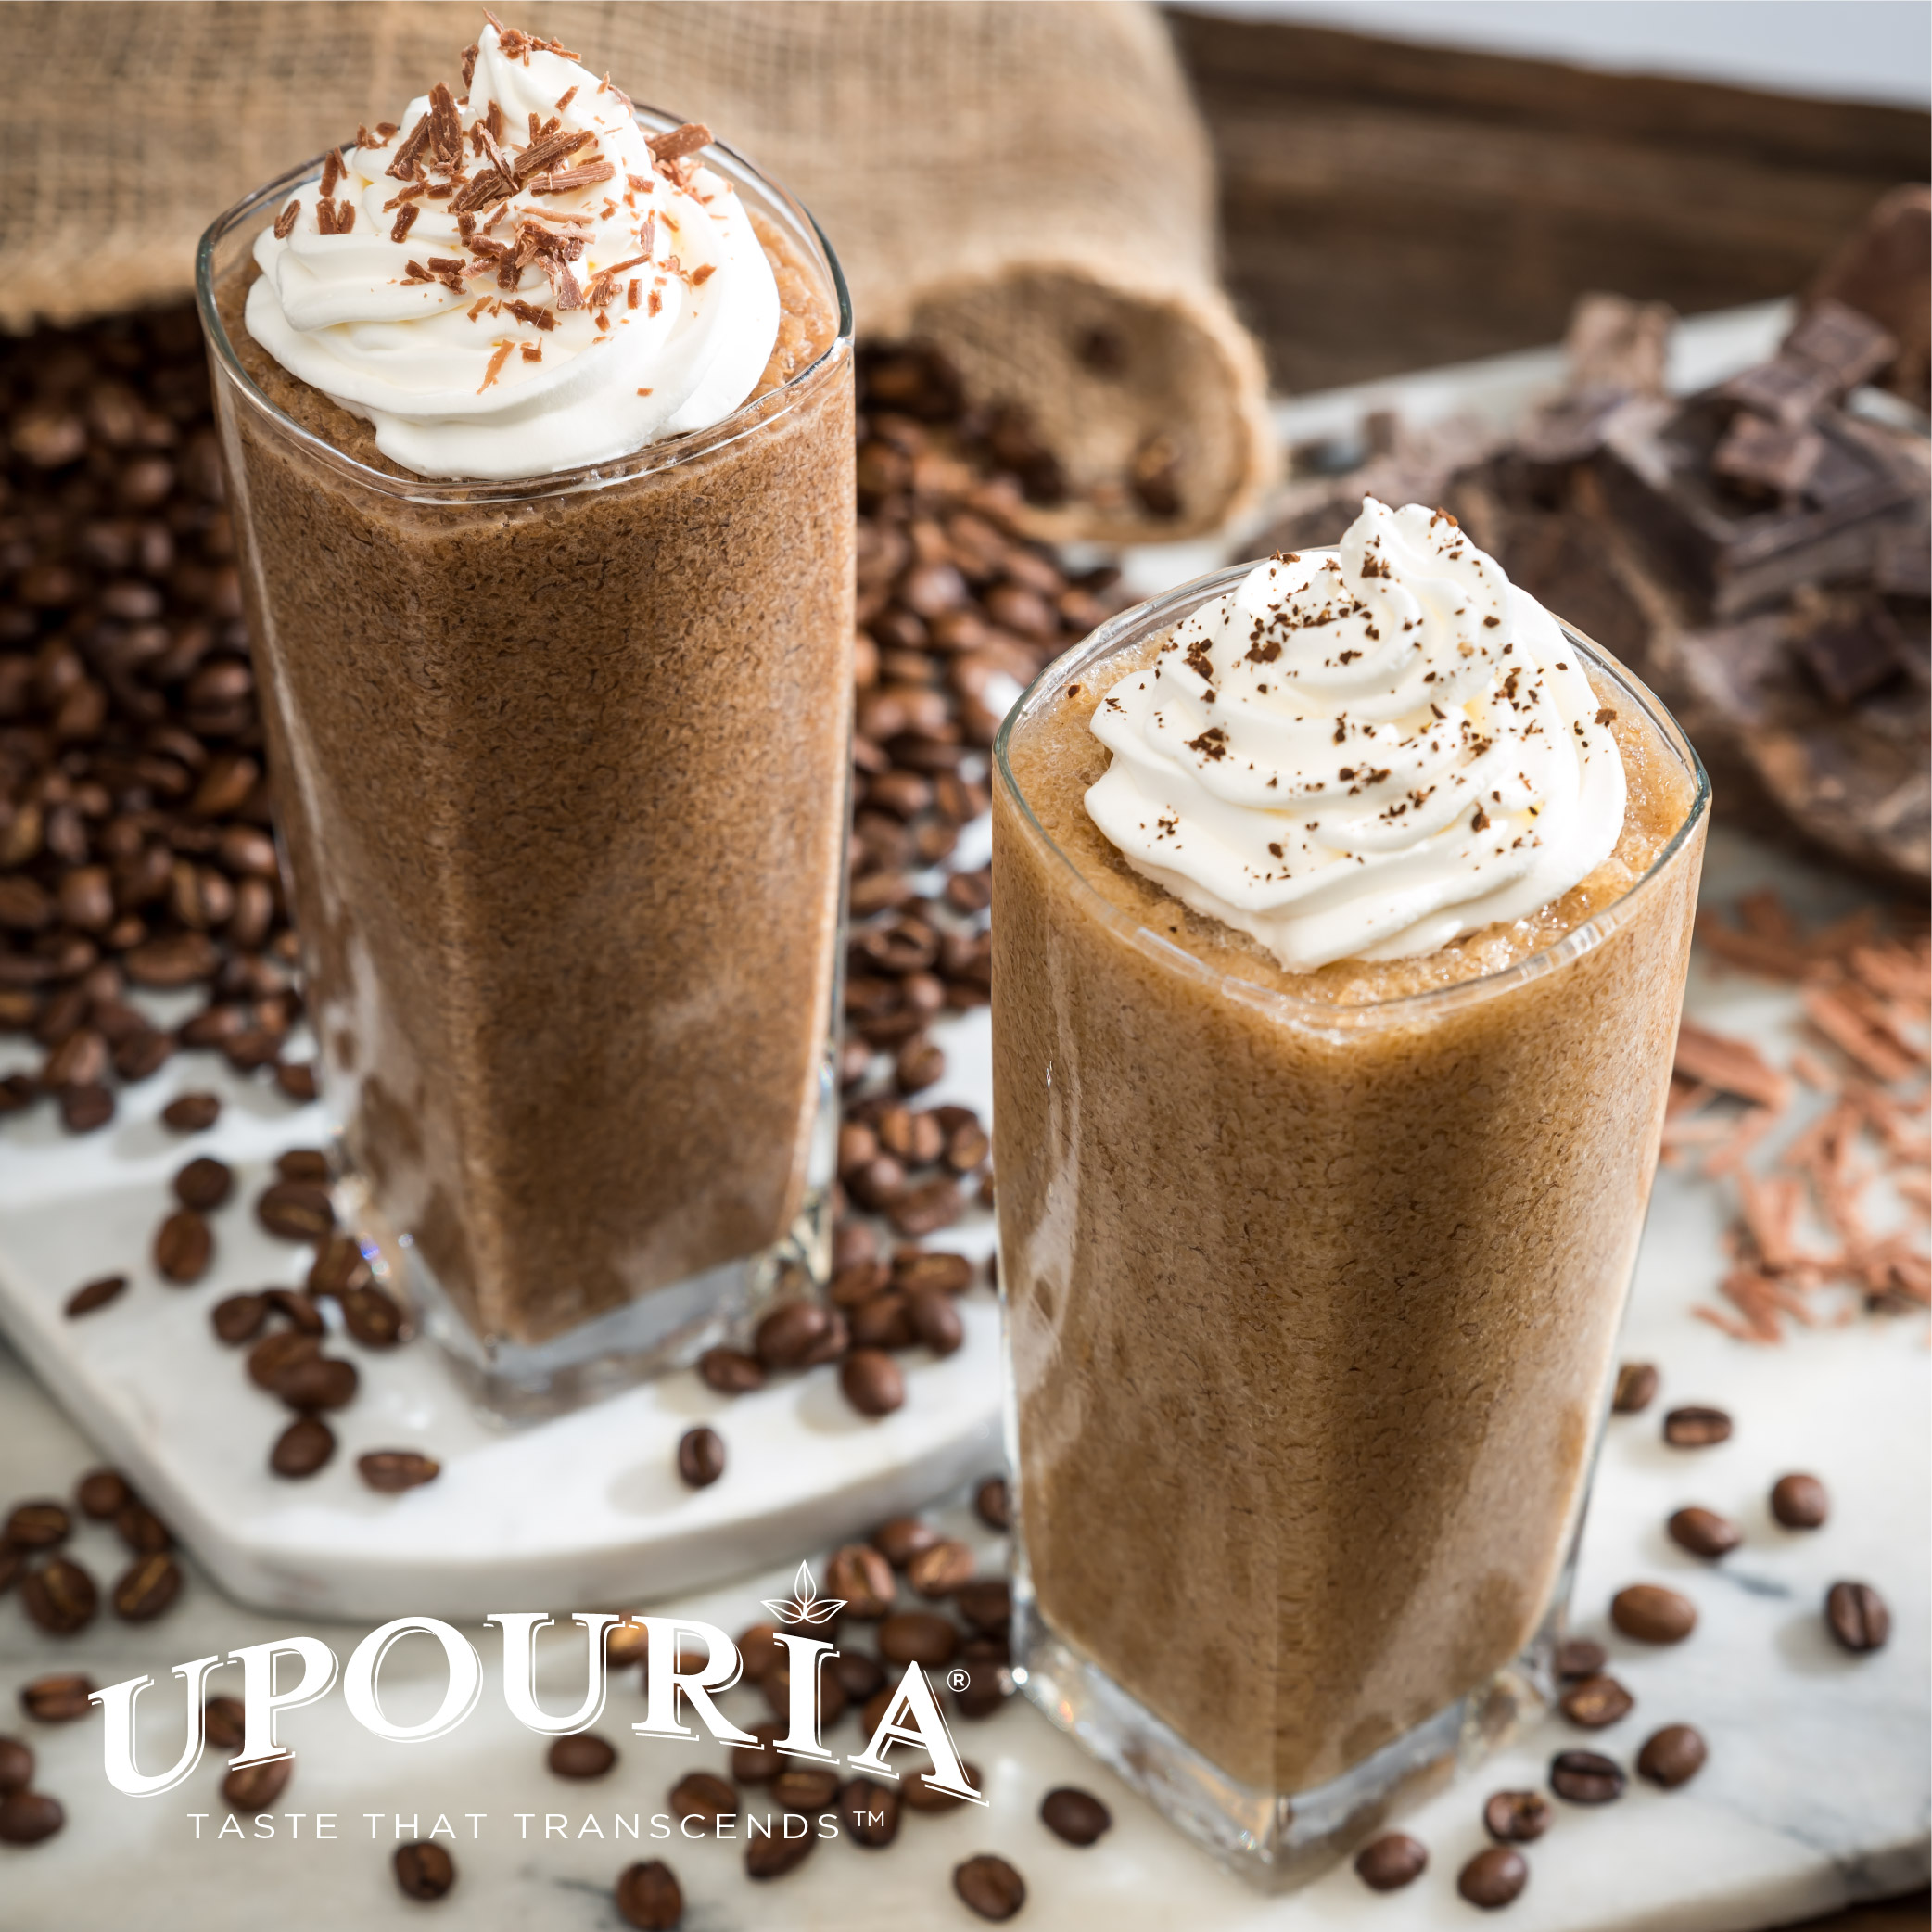 UPOURIA® Cold Brew Frozen Coffee - Sunny Sky Products